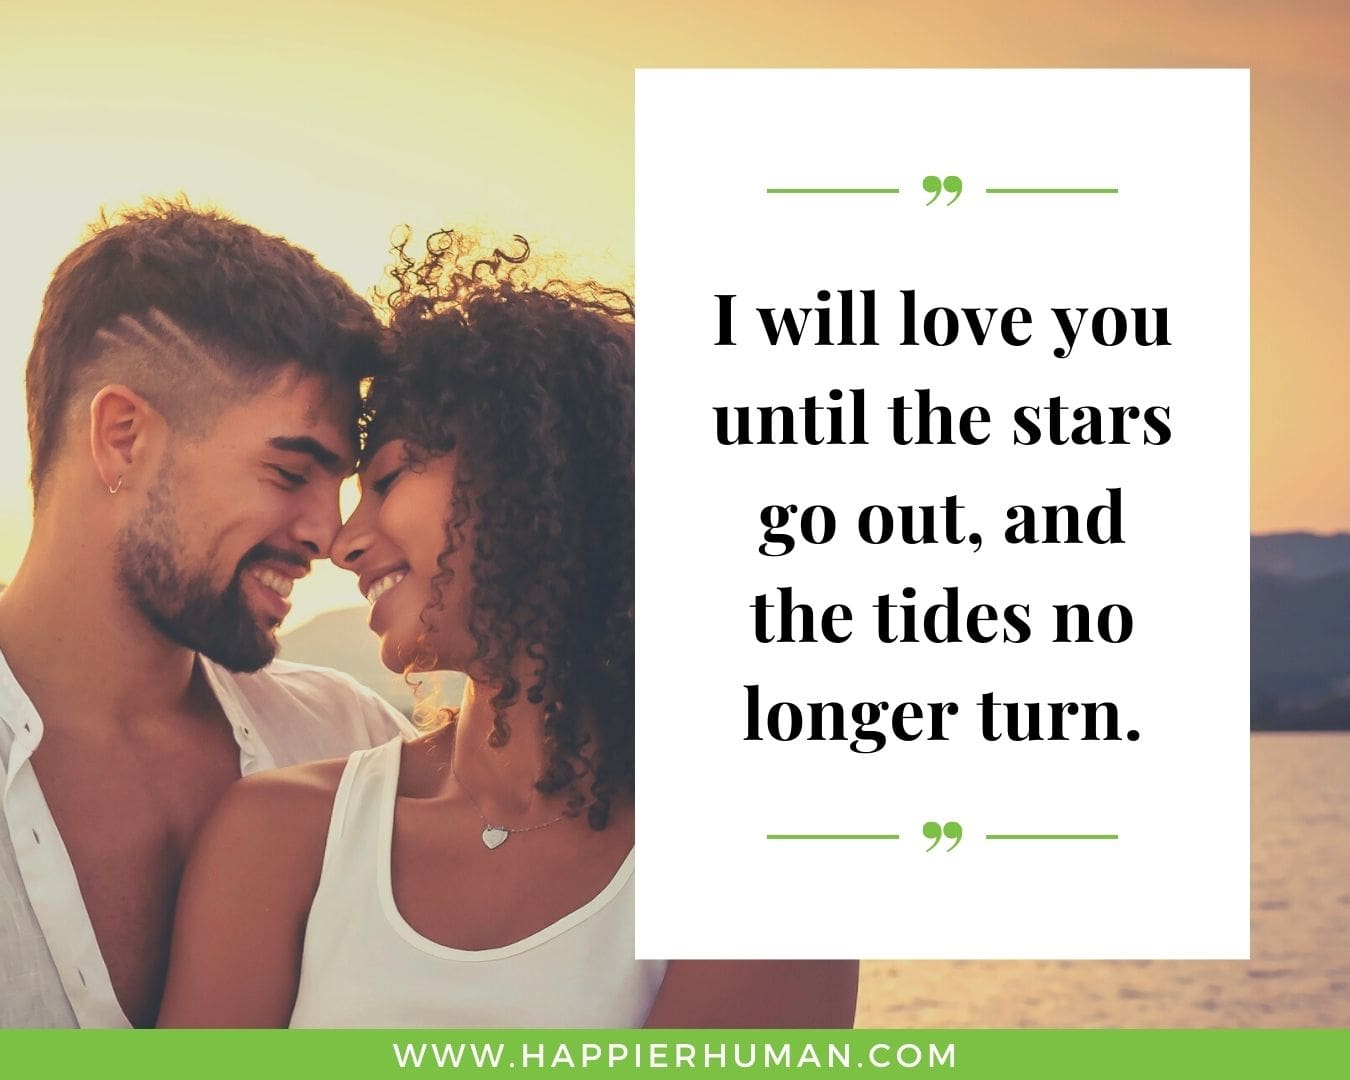 Loving messages for the woman you love- “I will love you until the stars go out, and the tides no longer turn.”